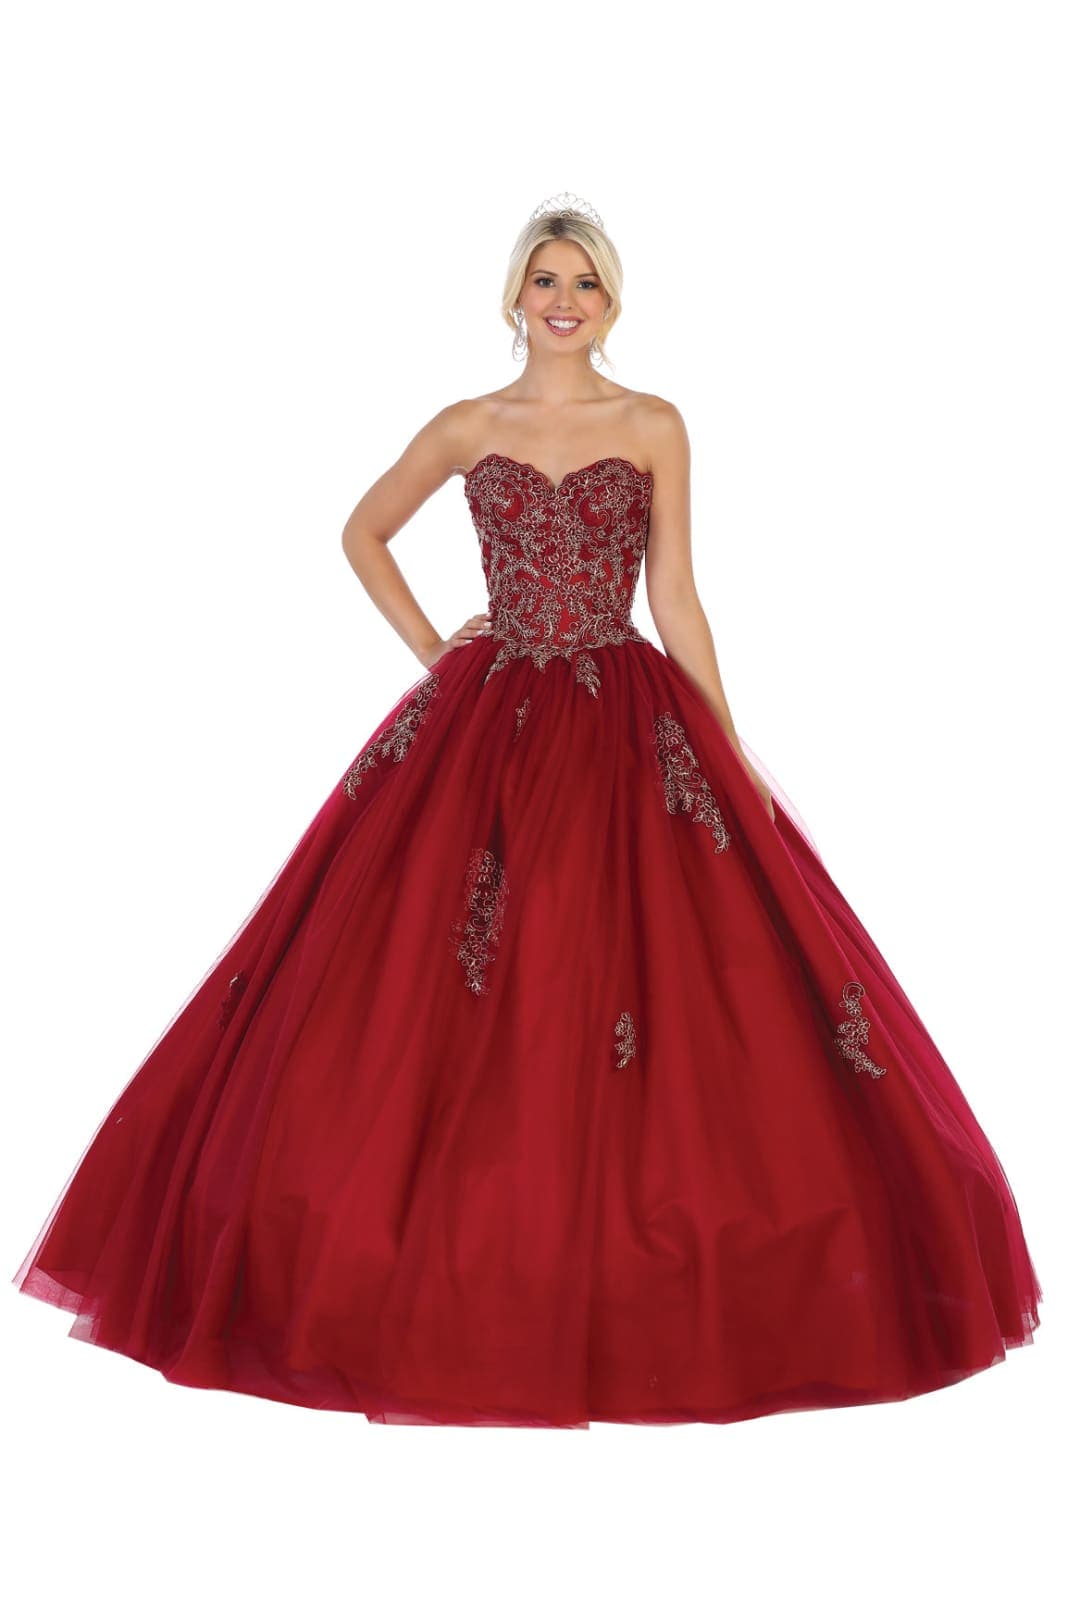 Quinceanera Ball Gown - BURGUNDY / 2